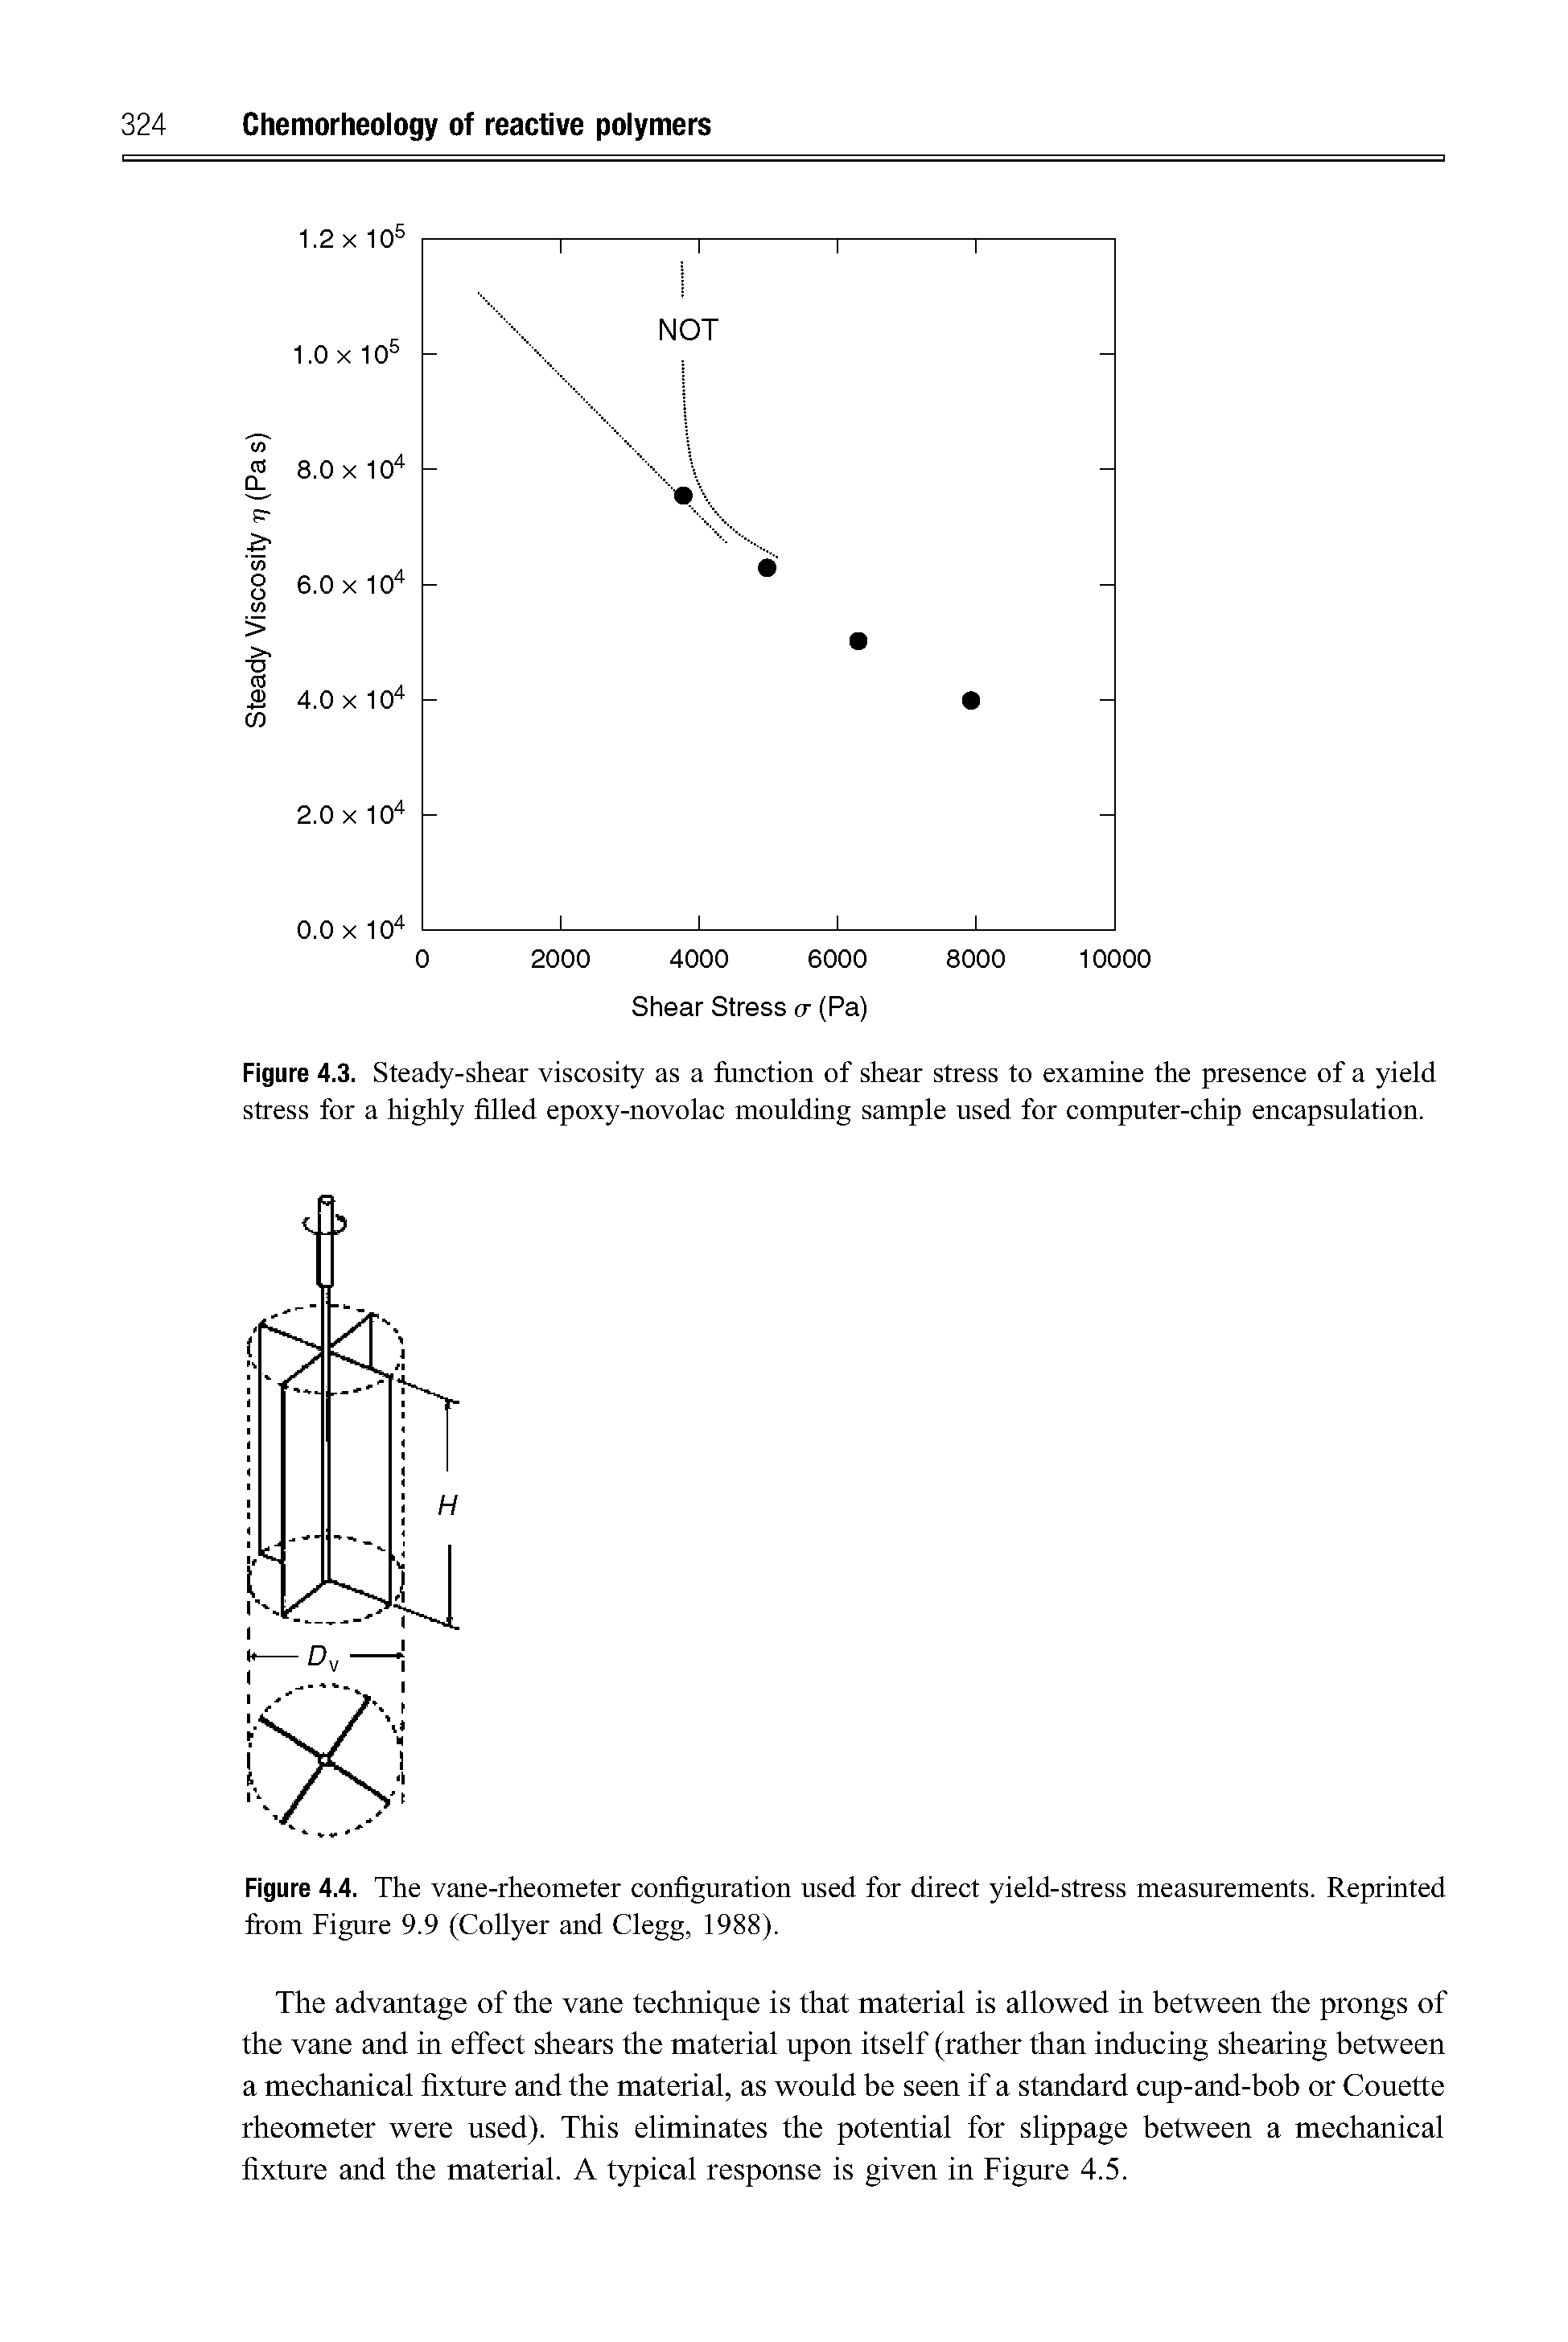 Figure 4.4. The vane-rheometer configuration used for direct yield-stress measurements. Reprinted from Figure 9.9 (Collyer and Clegg, 1988).